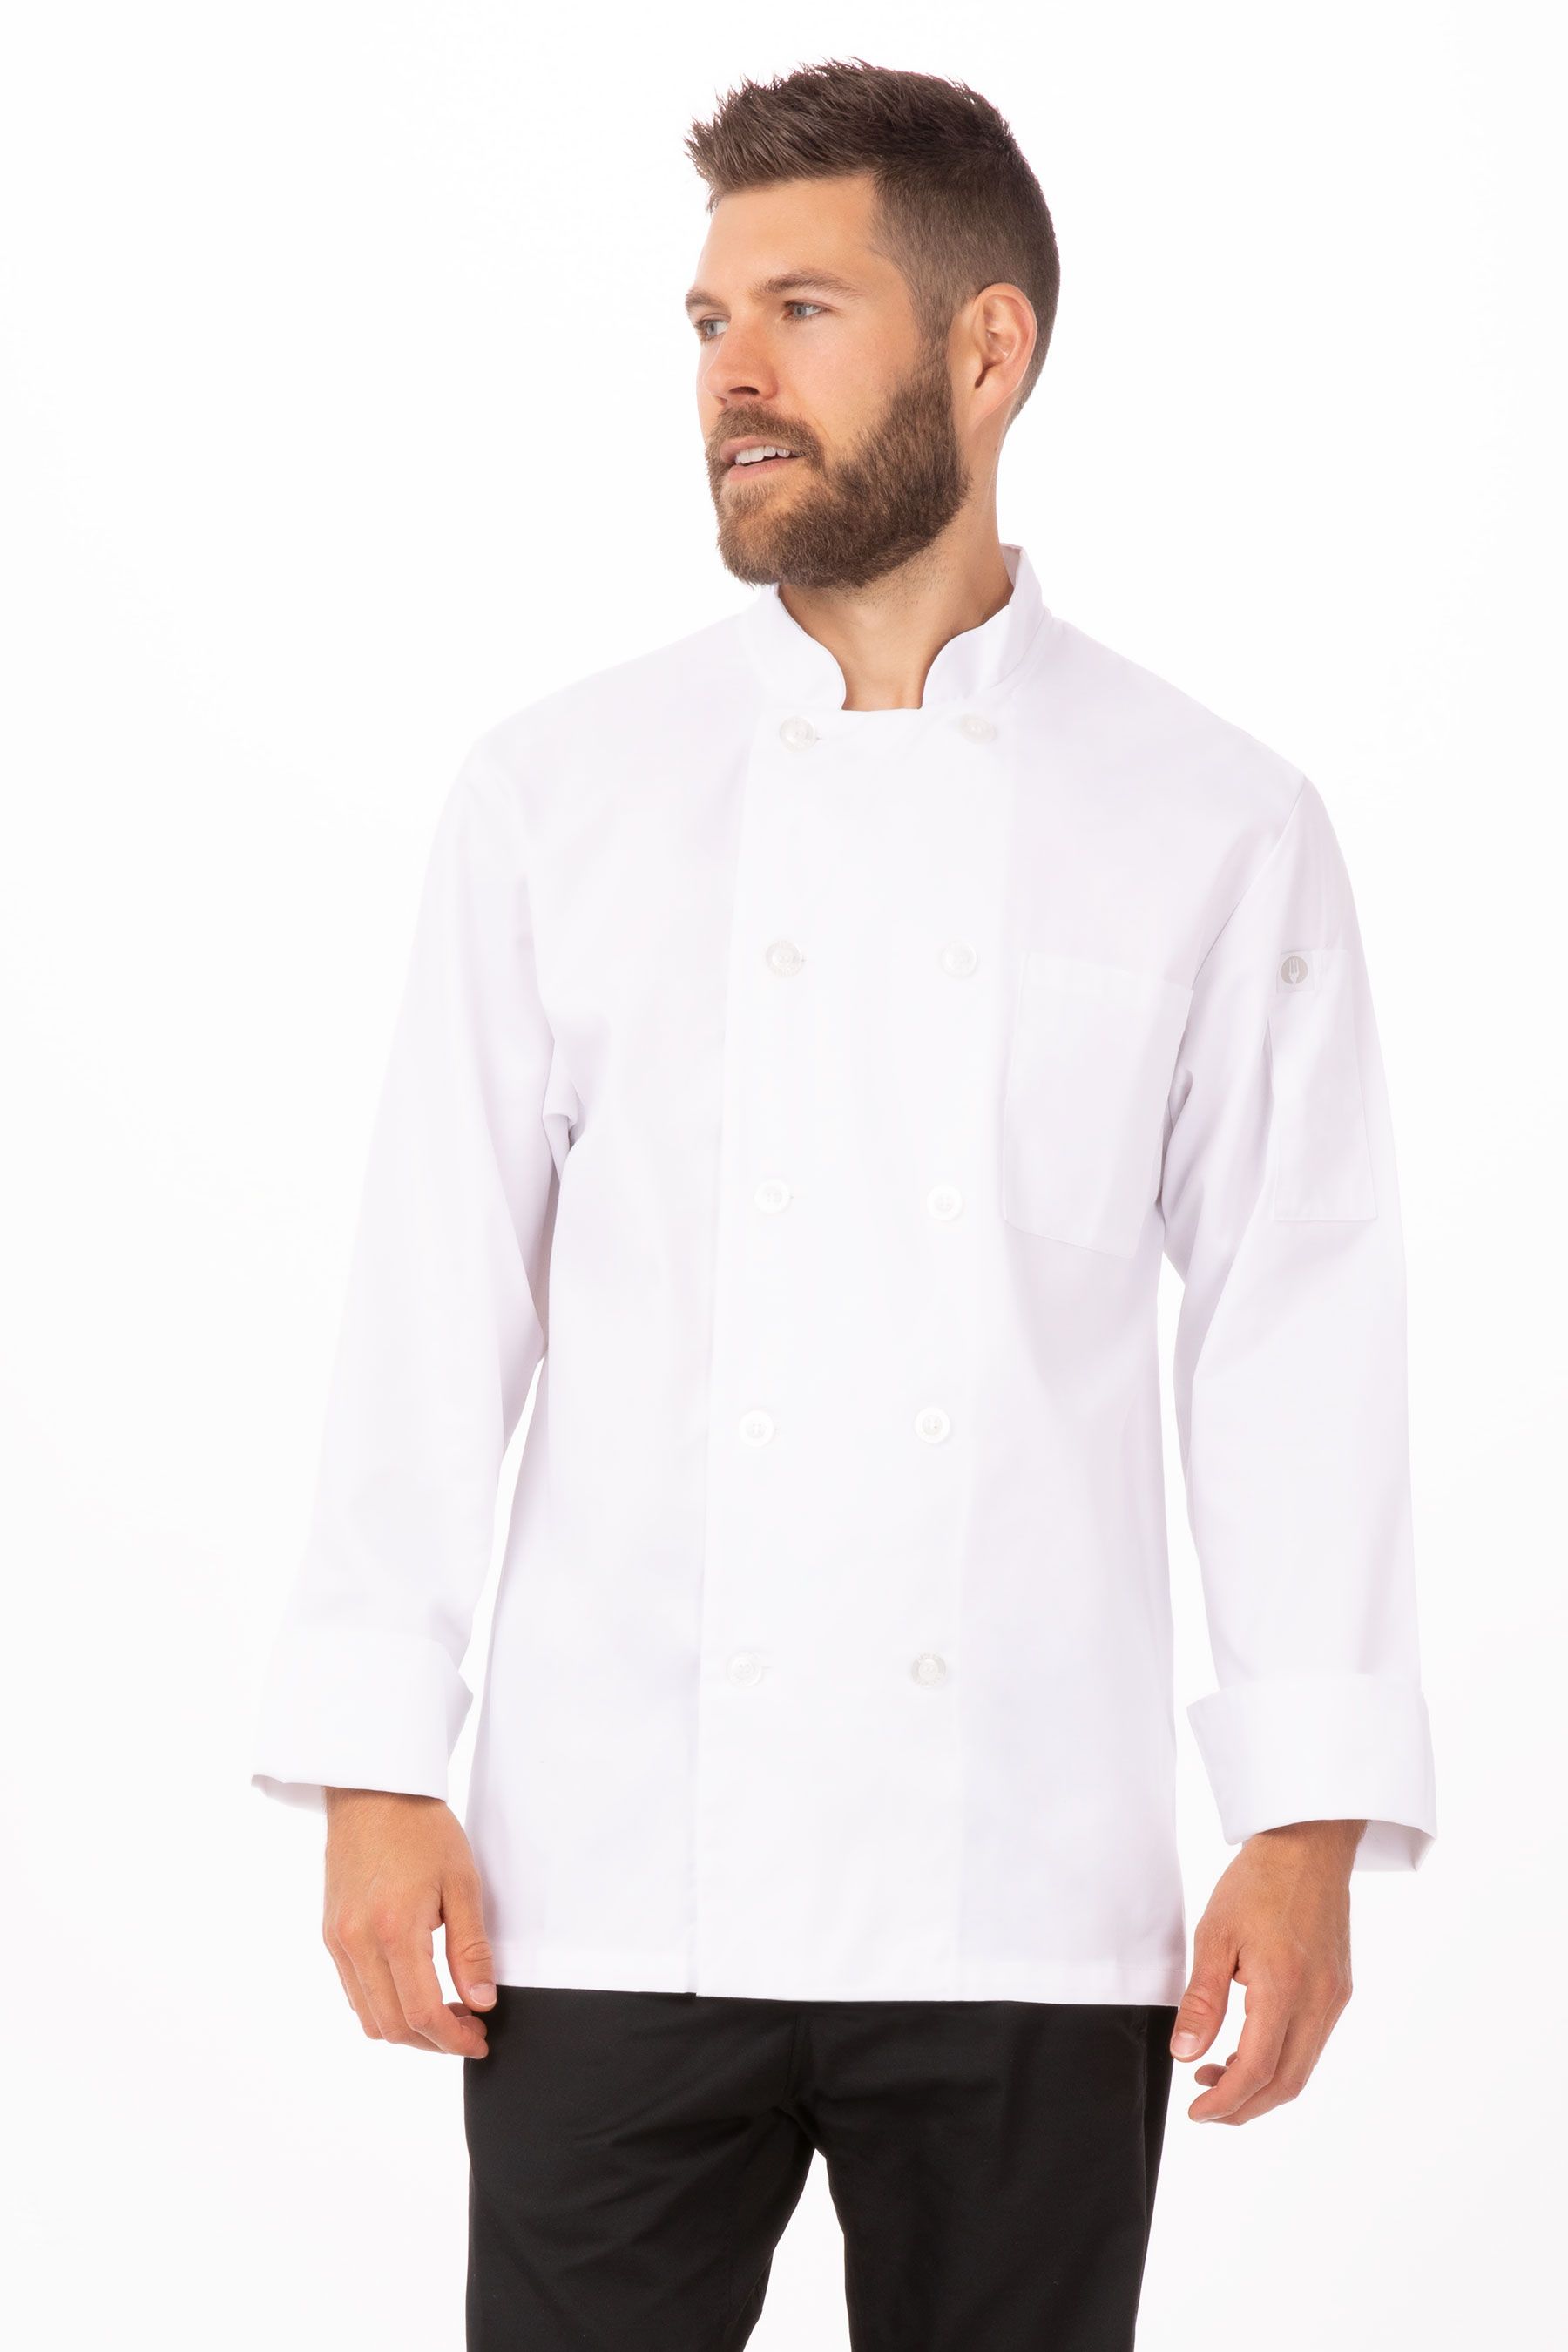 LARGE WHITE LE MANS DOUBLE
BREASTED CHEF COAT/EACH, 